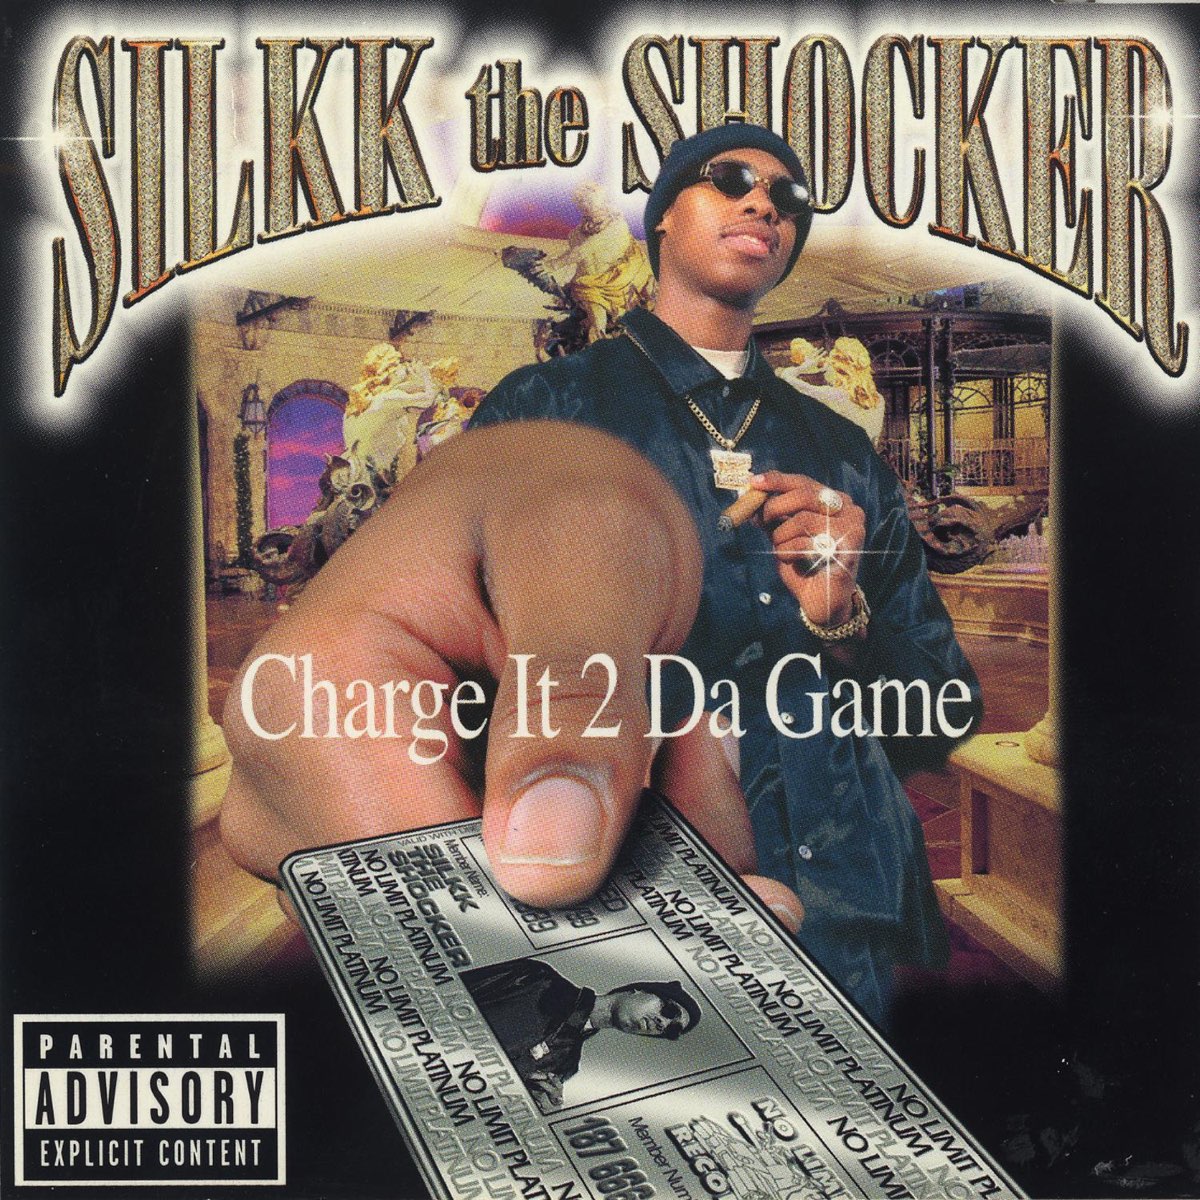 charge-it-2-da-game-by-silkk-the-shocker-on-apple-music